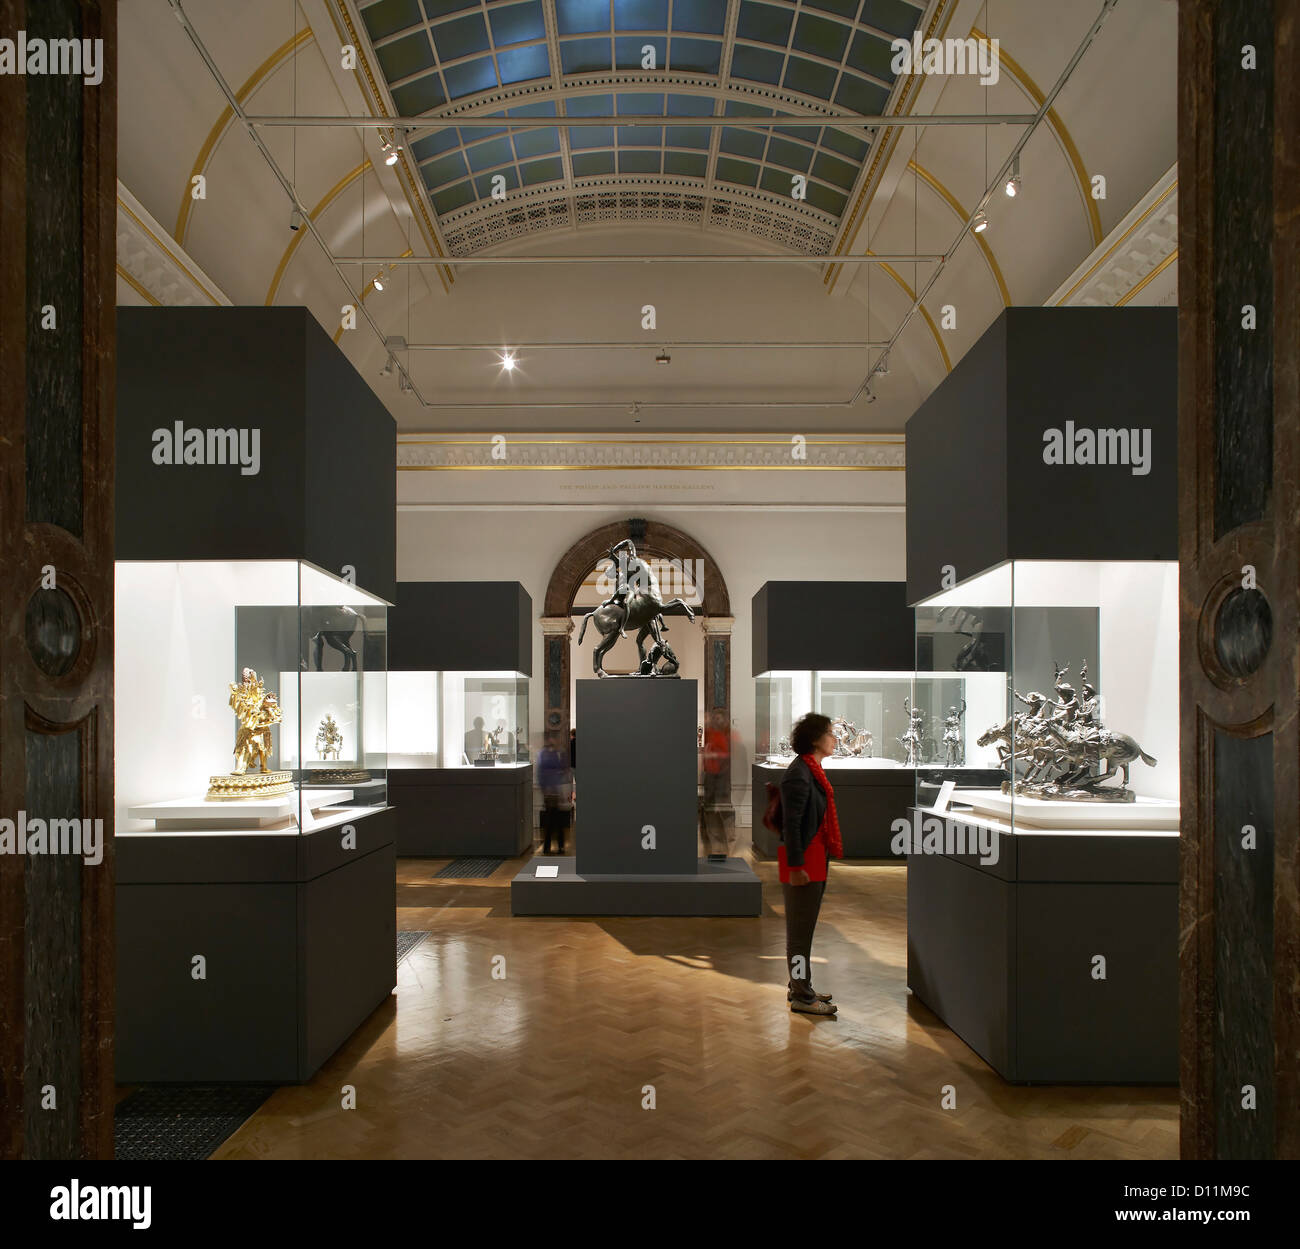 Royal Academy Bronze Exhibition, London, United Kingdom. Architect: Stanton Williams, 2012. Exhibition room with vaulted skyligh Stock Photo